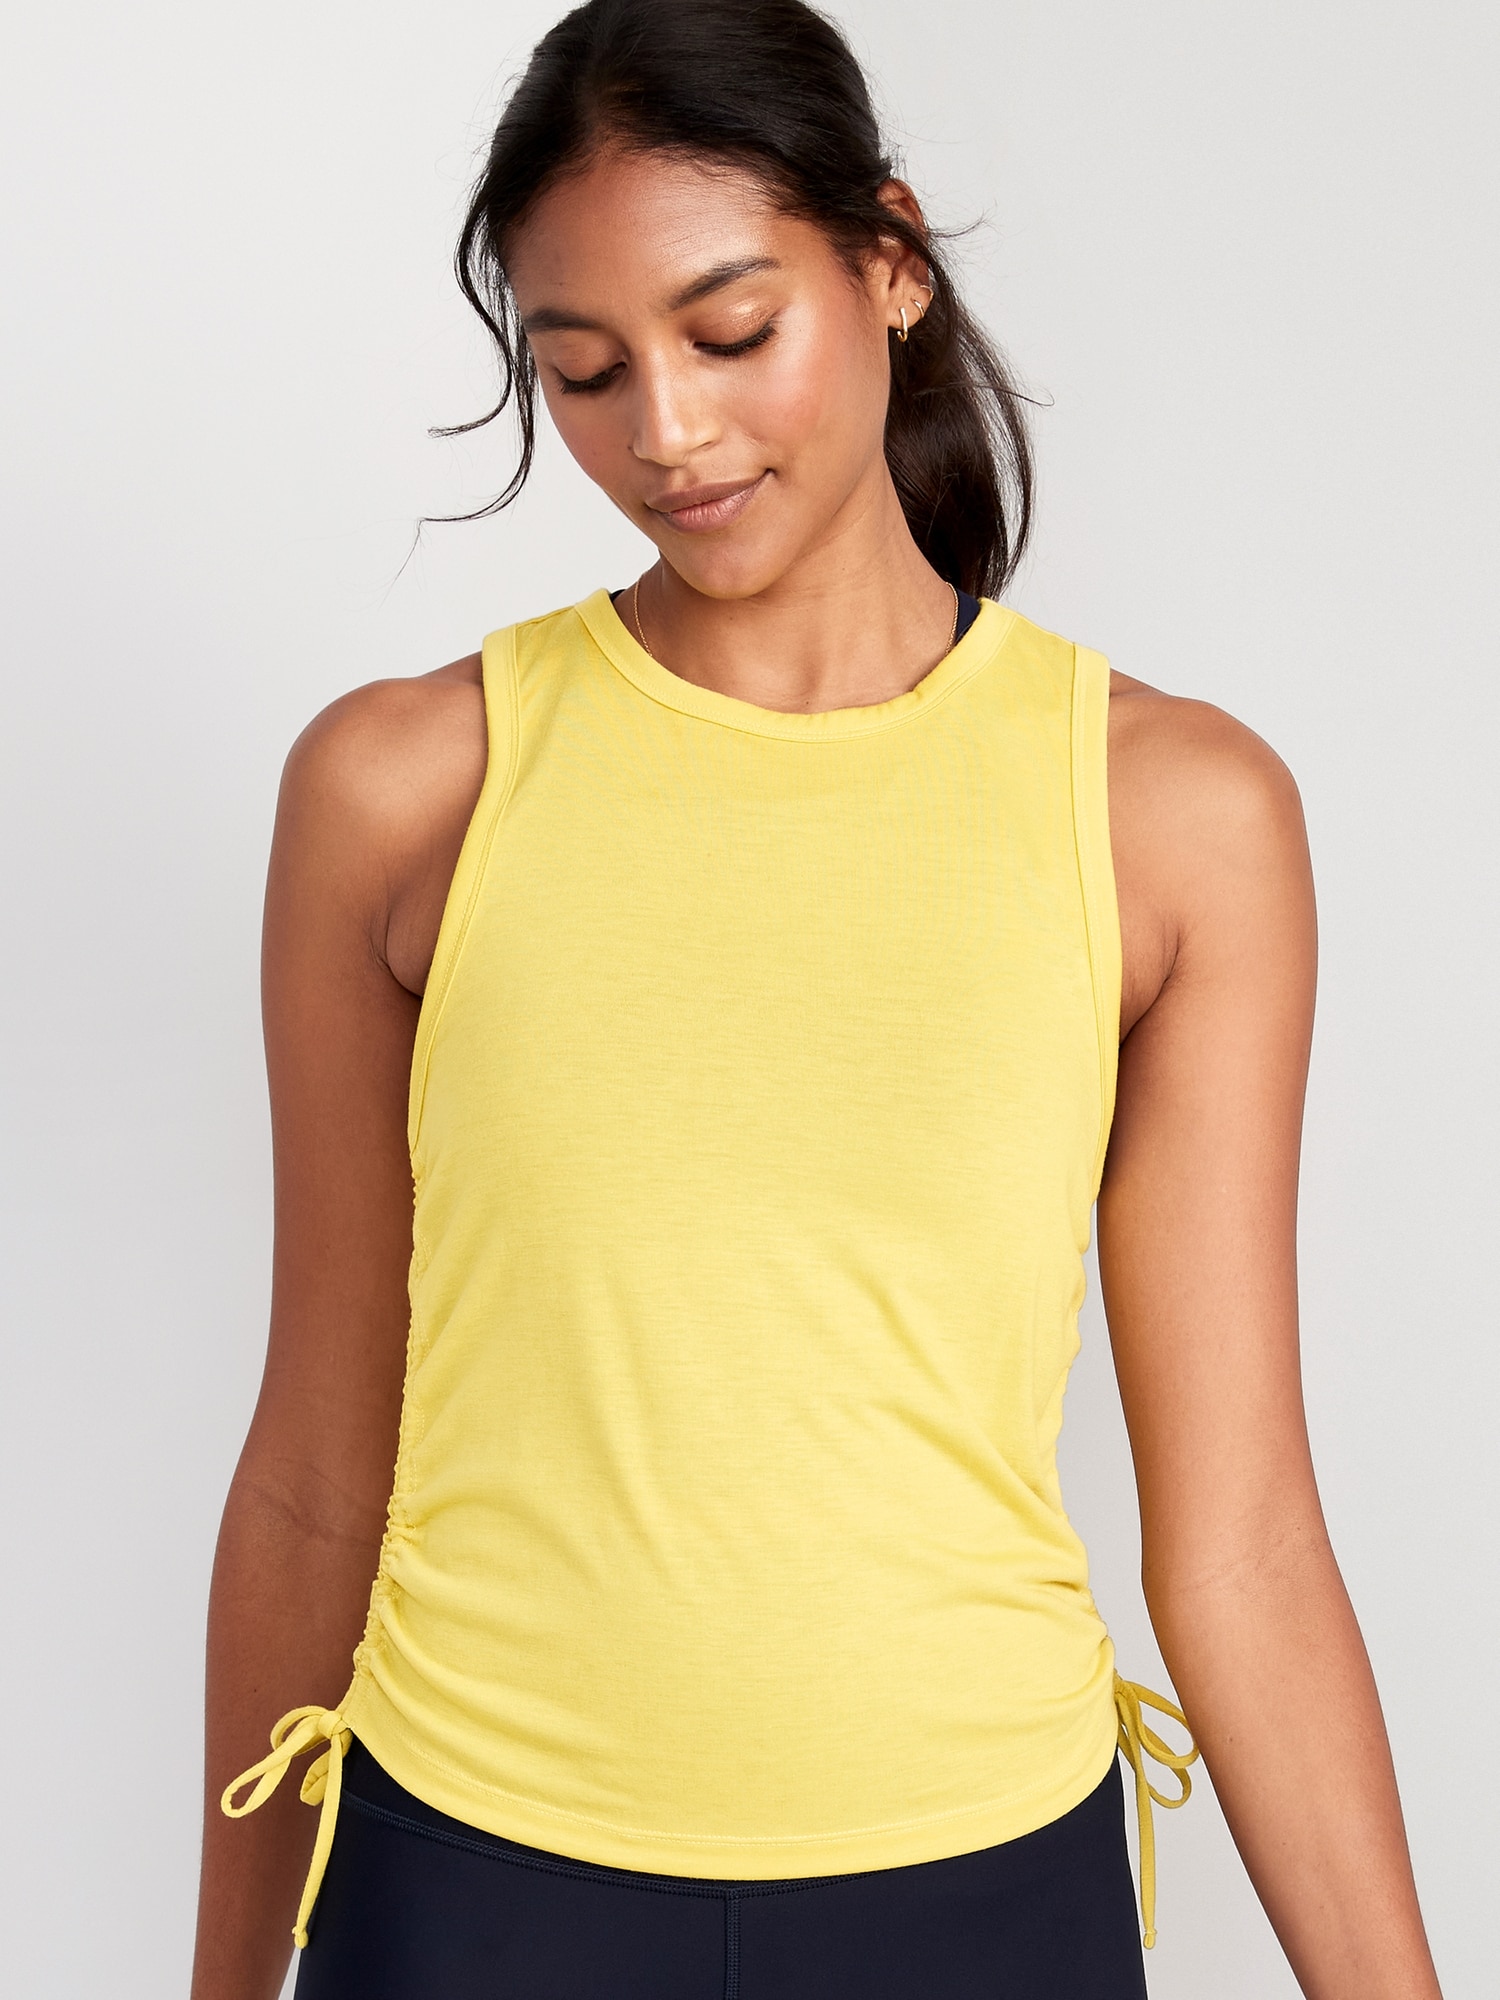 Old Navy UltraLite Ruched Tie Tank Top for Women yellow. 1